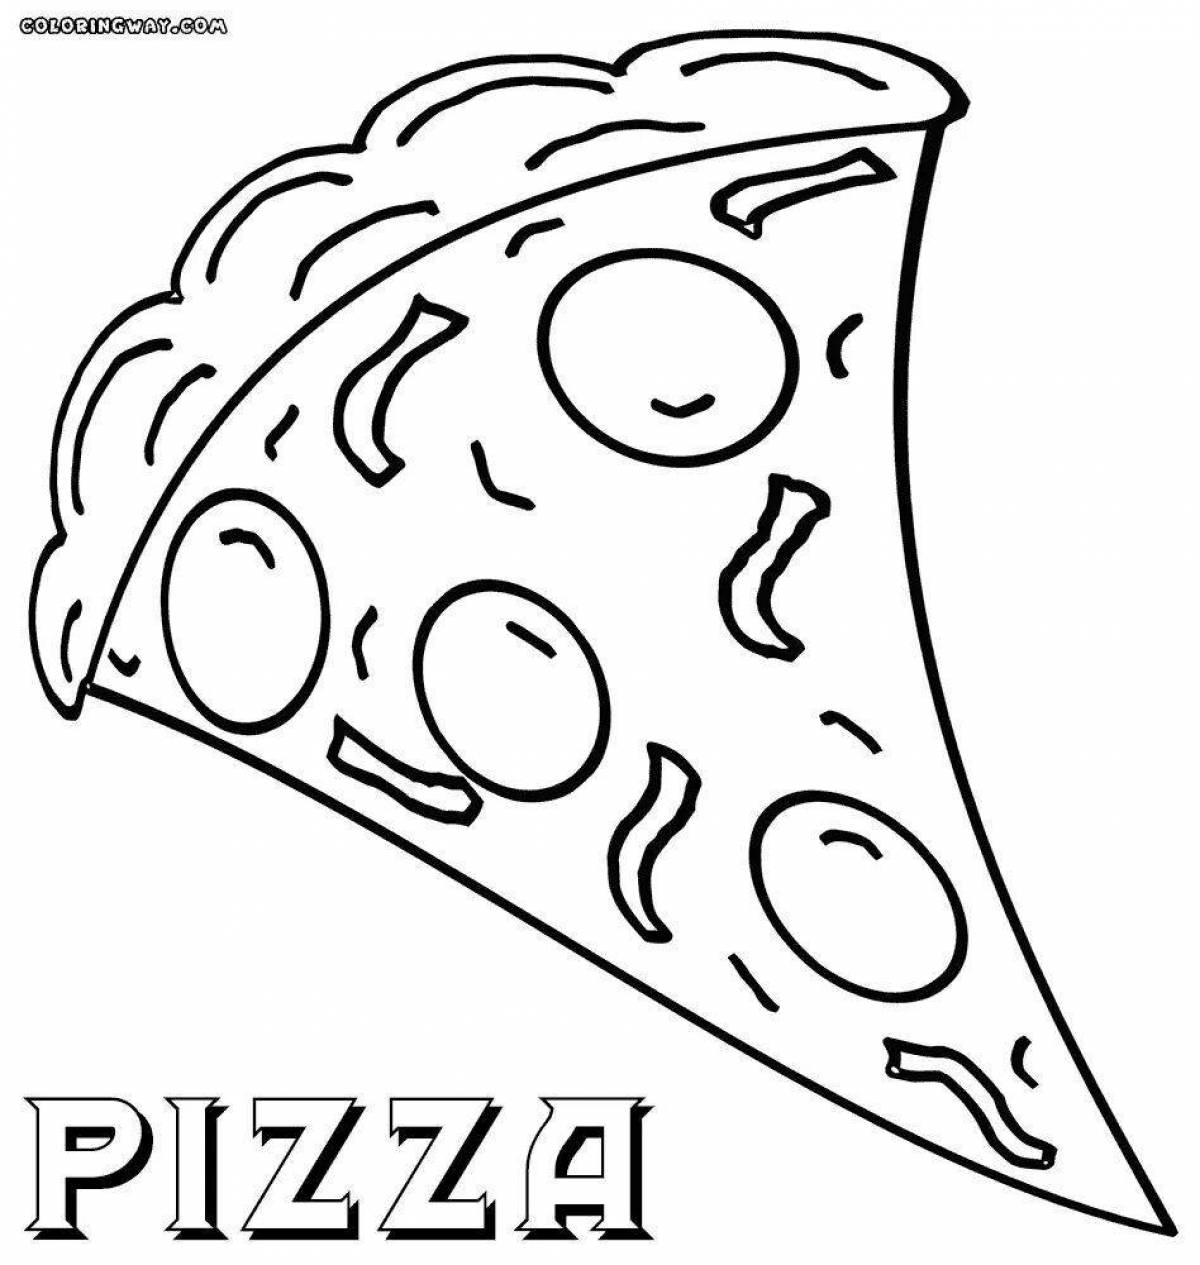 Coloring page irresistible pizza